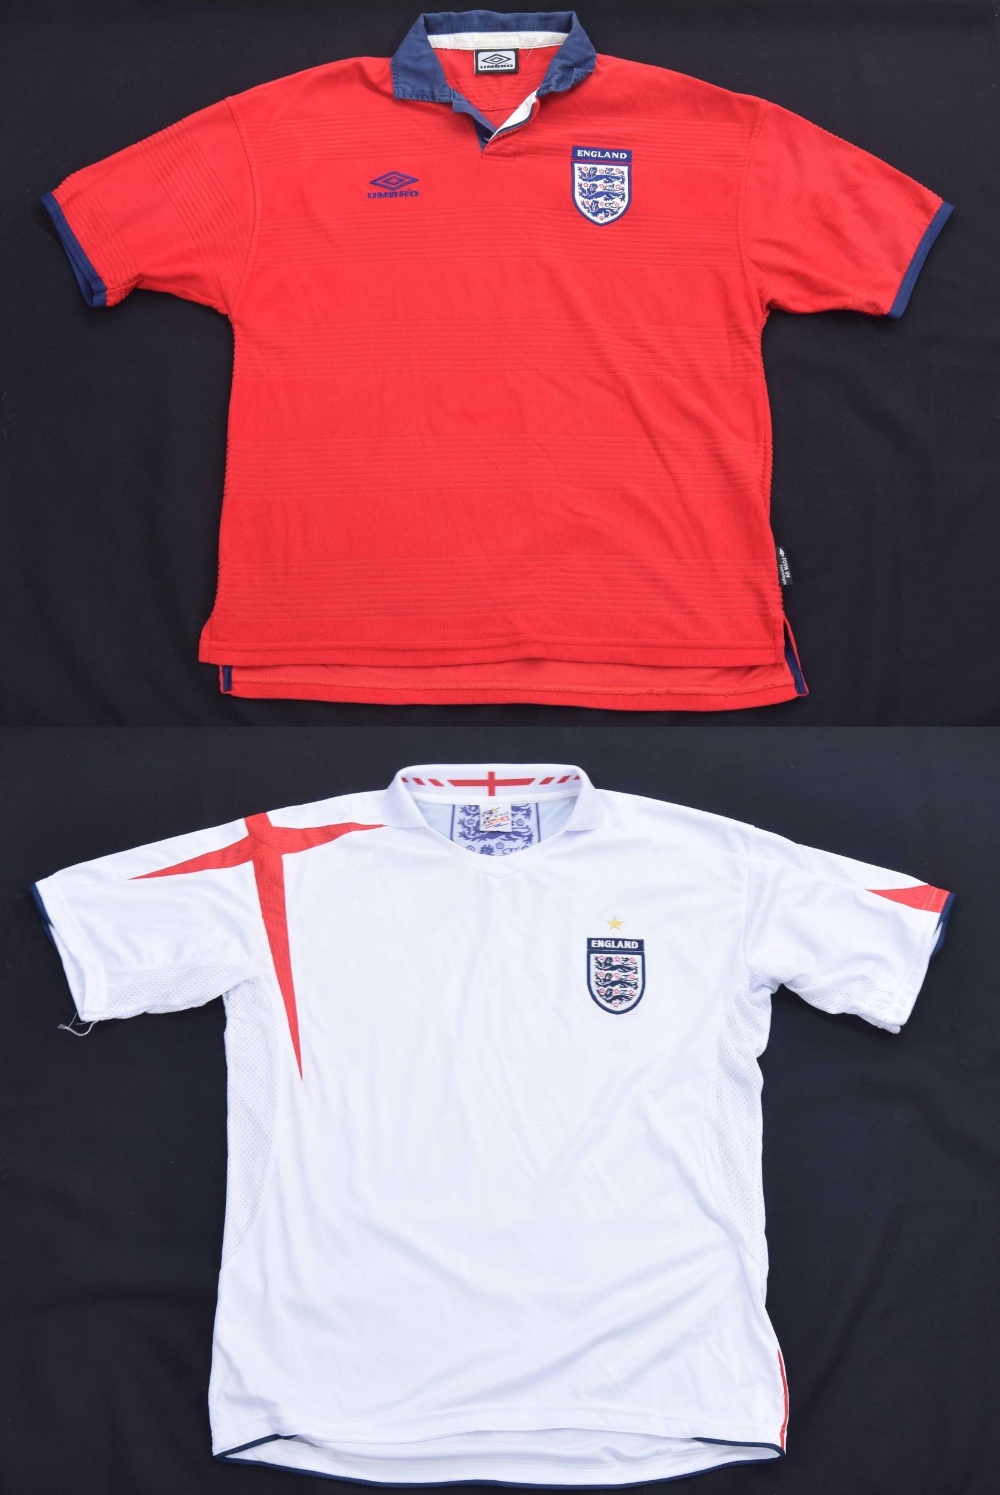 England - Short sleeved red (away) football shirt, Umbro, Form UV, circa 2000, size L; together with